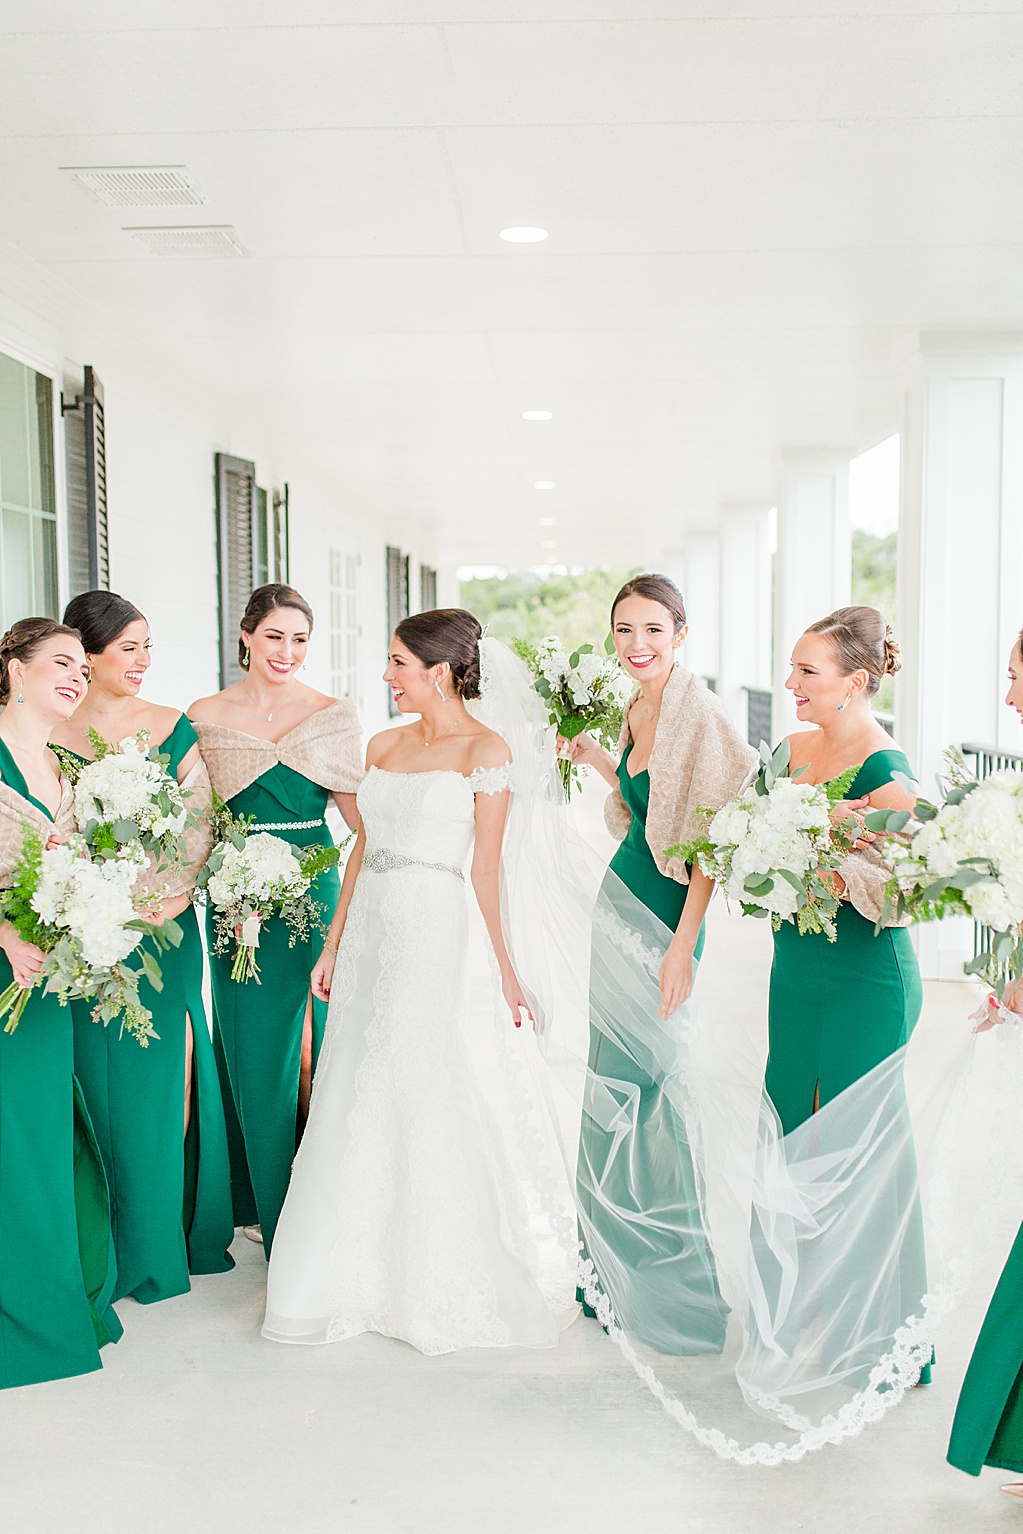 Winter Wedding at Kendall Plantation Hill Country Wedding Venue by Allison Jeffers Photography 0032